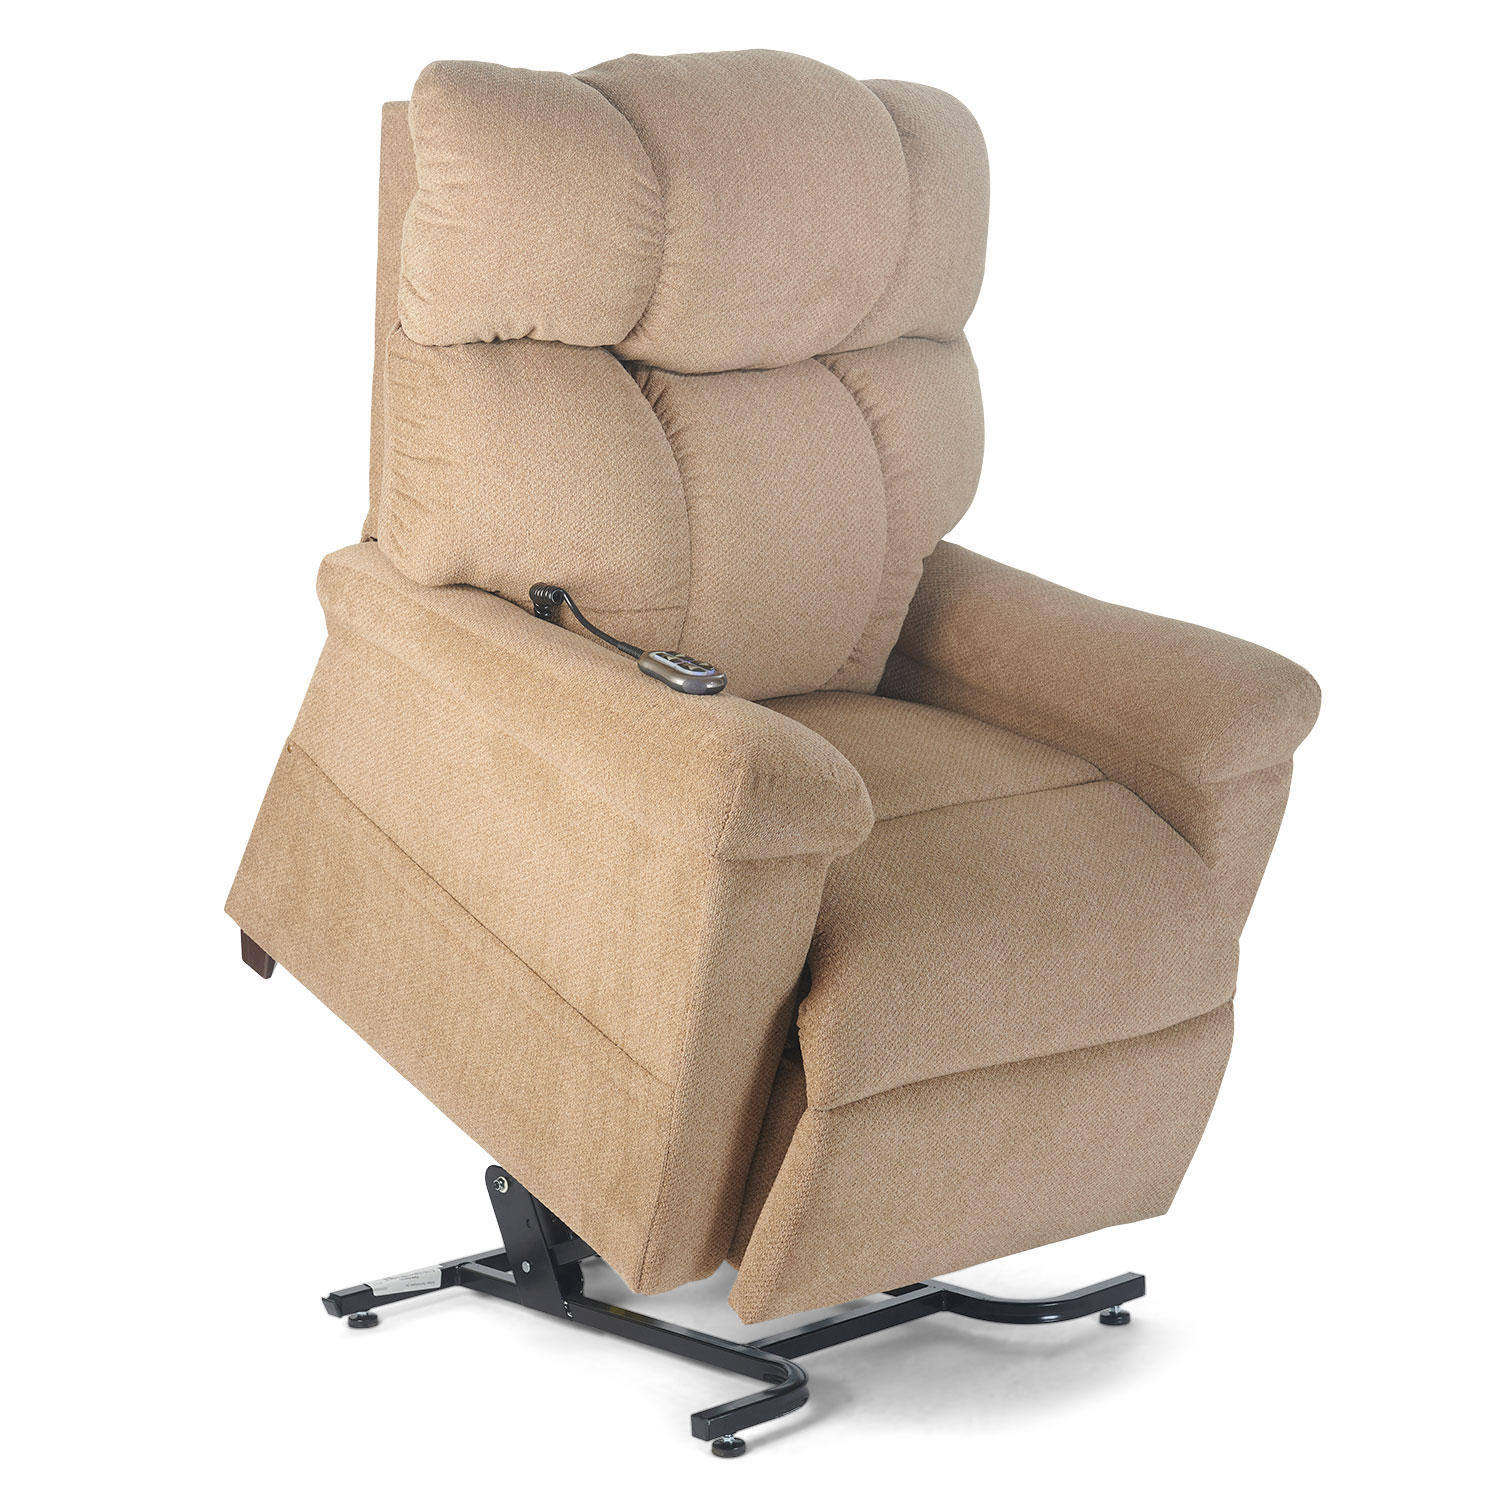 Member’s Mark Power Lift Recliner Standard with Adjustable Headrest, Stain Resistant Fabric